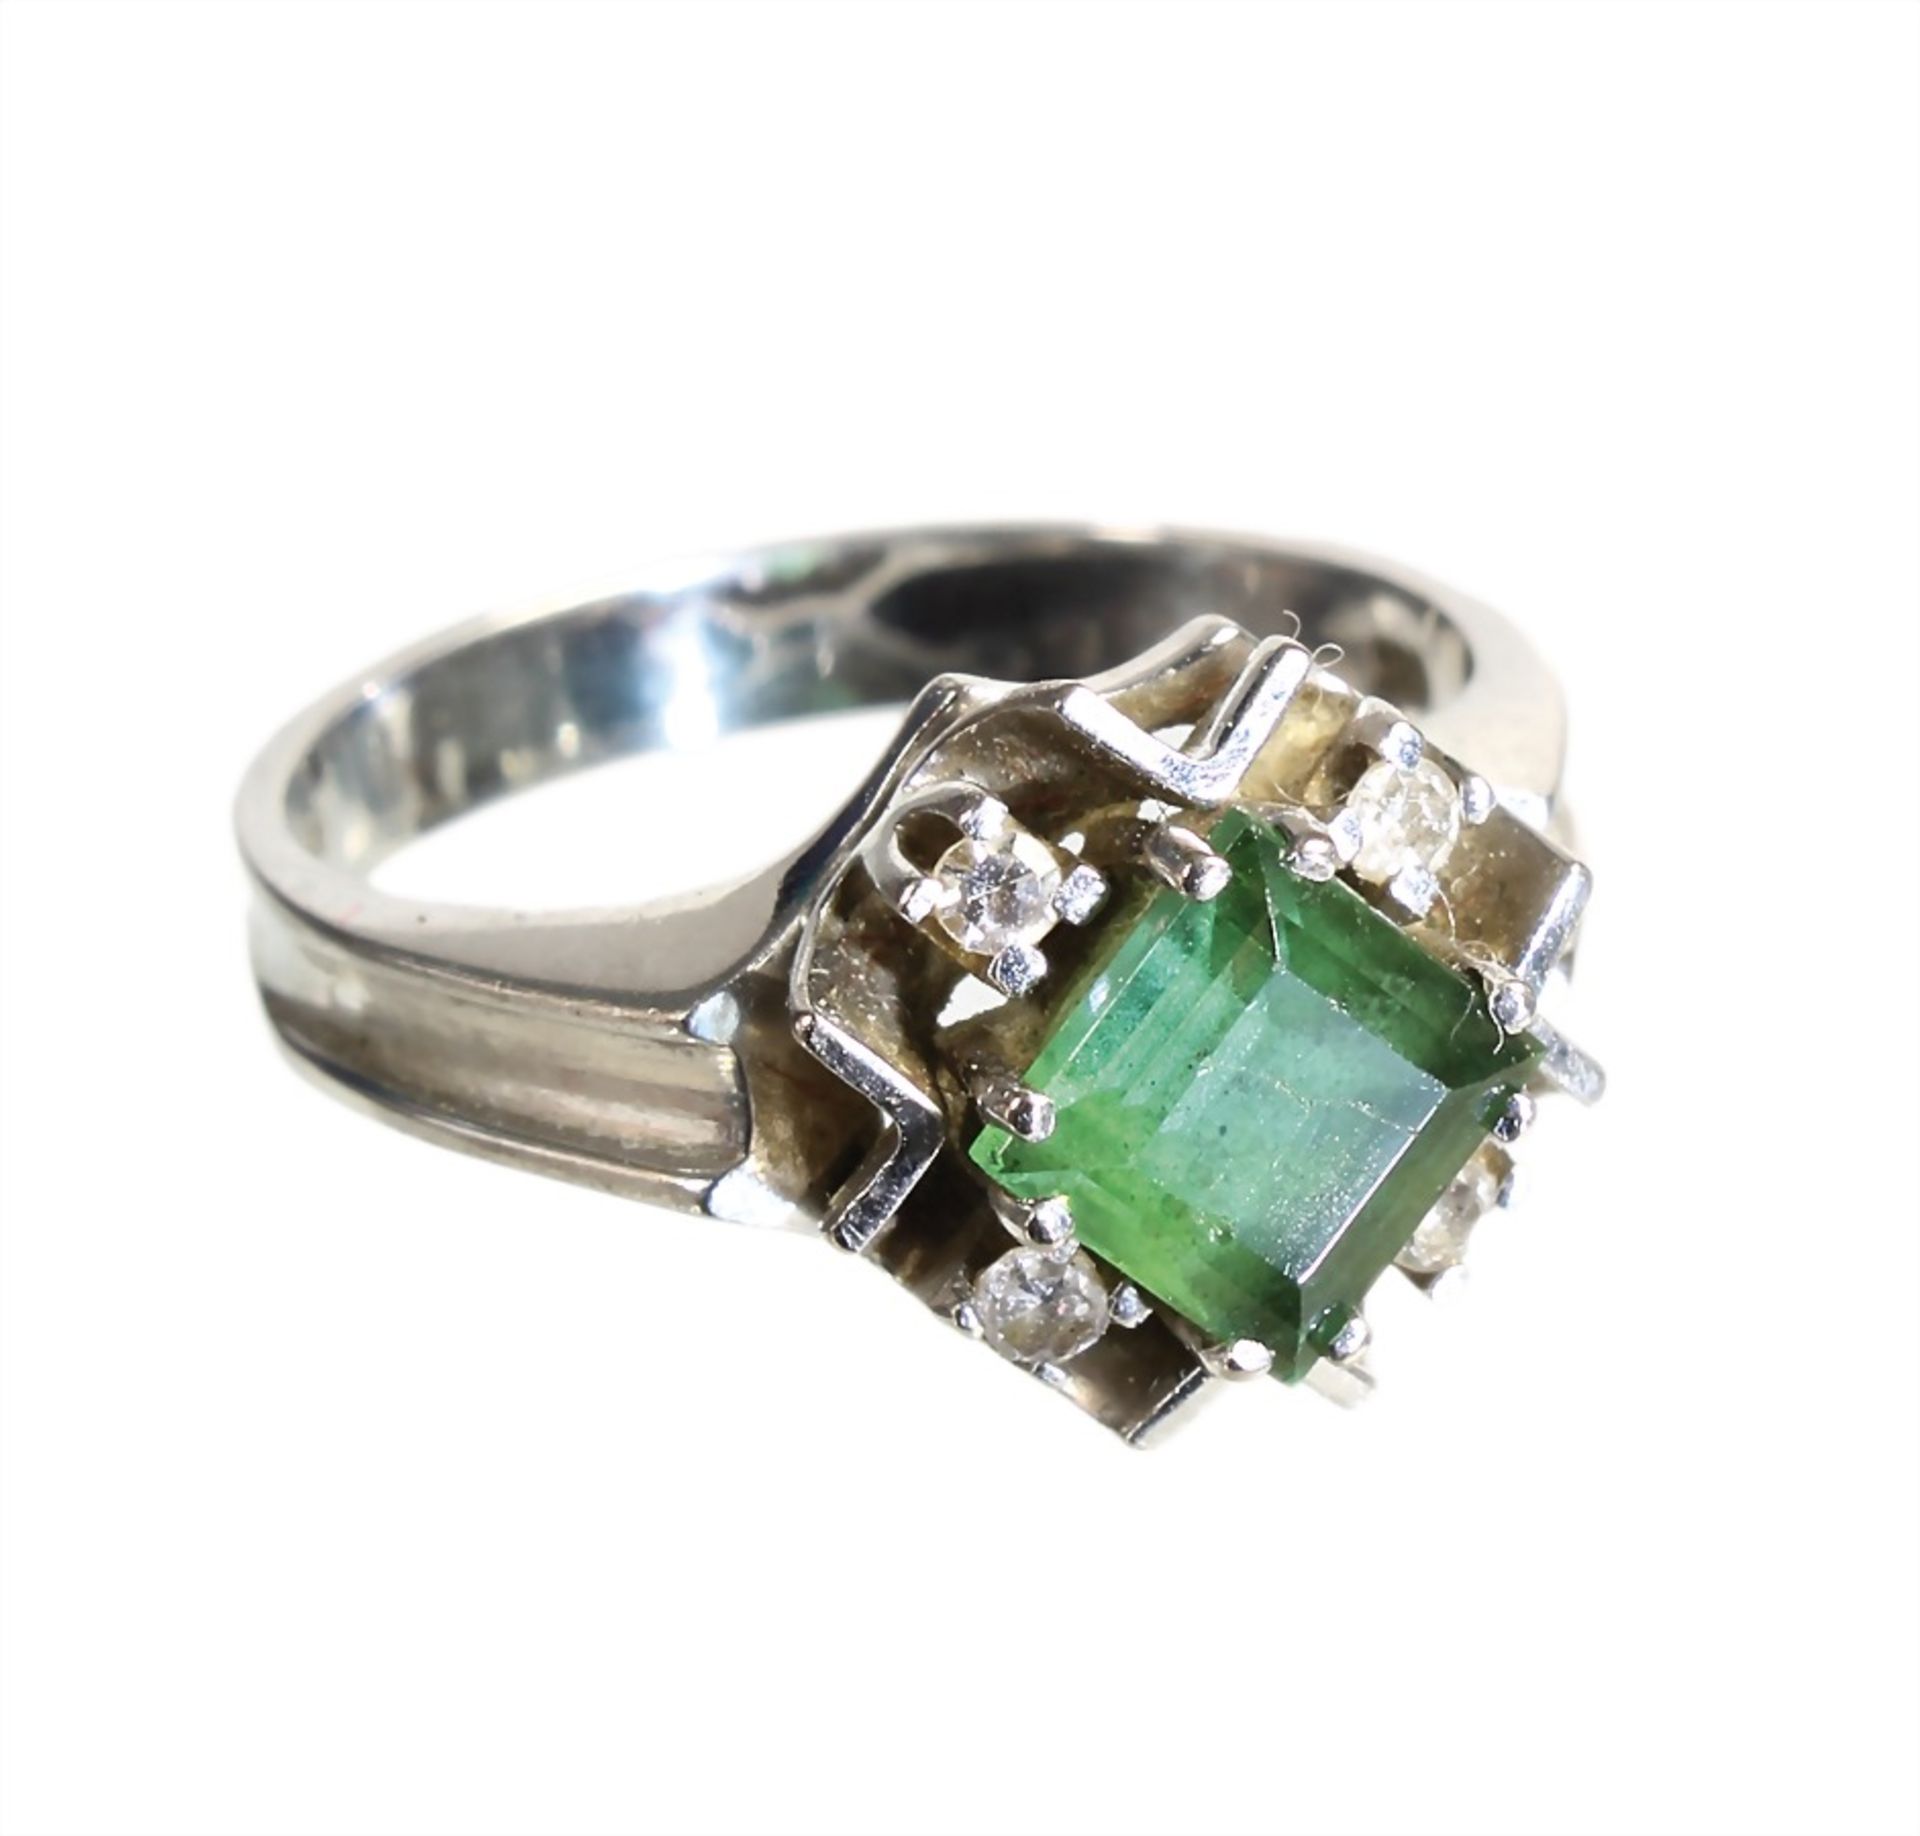 ring, white gold 585/000, tourmaline with carré cut c. 1.2 ct, 4 diamonds white, ring width c.